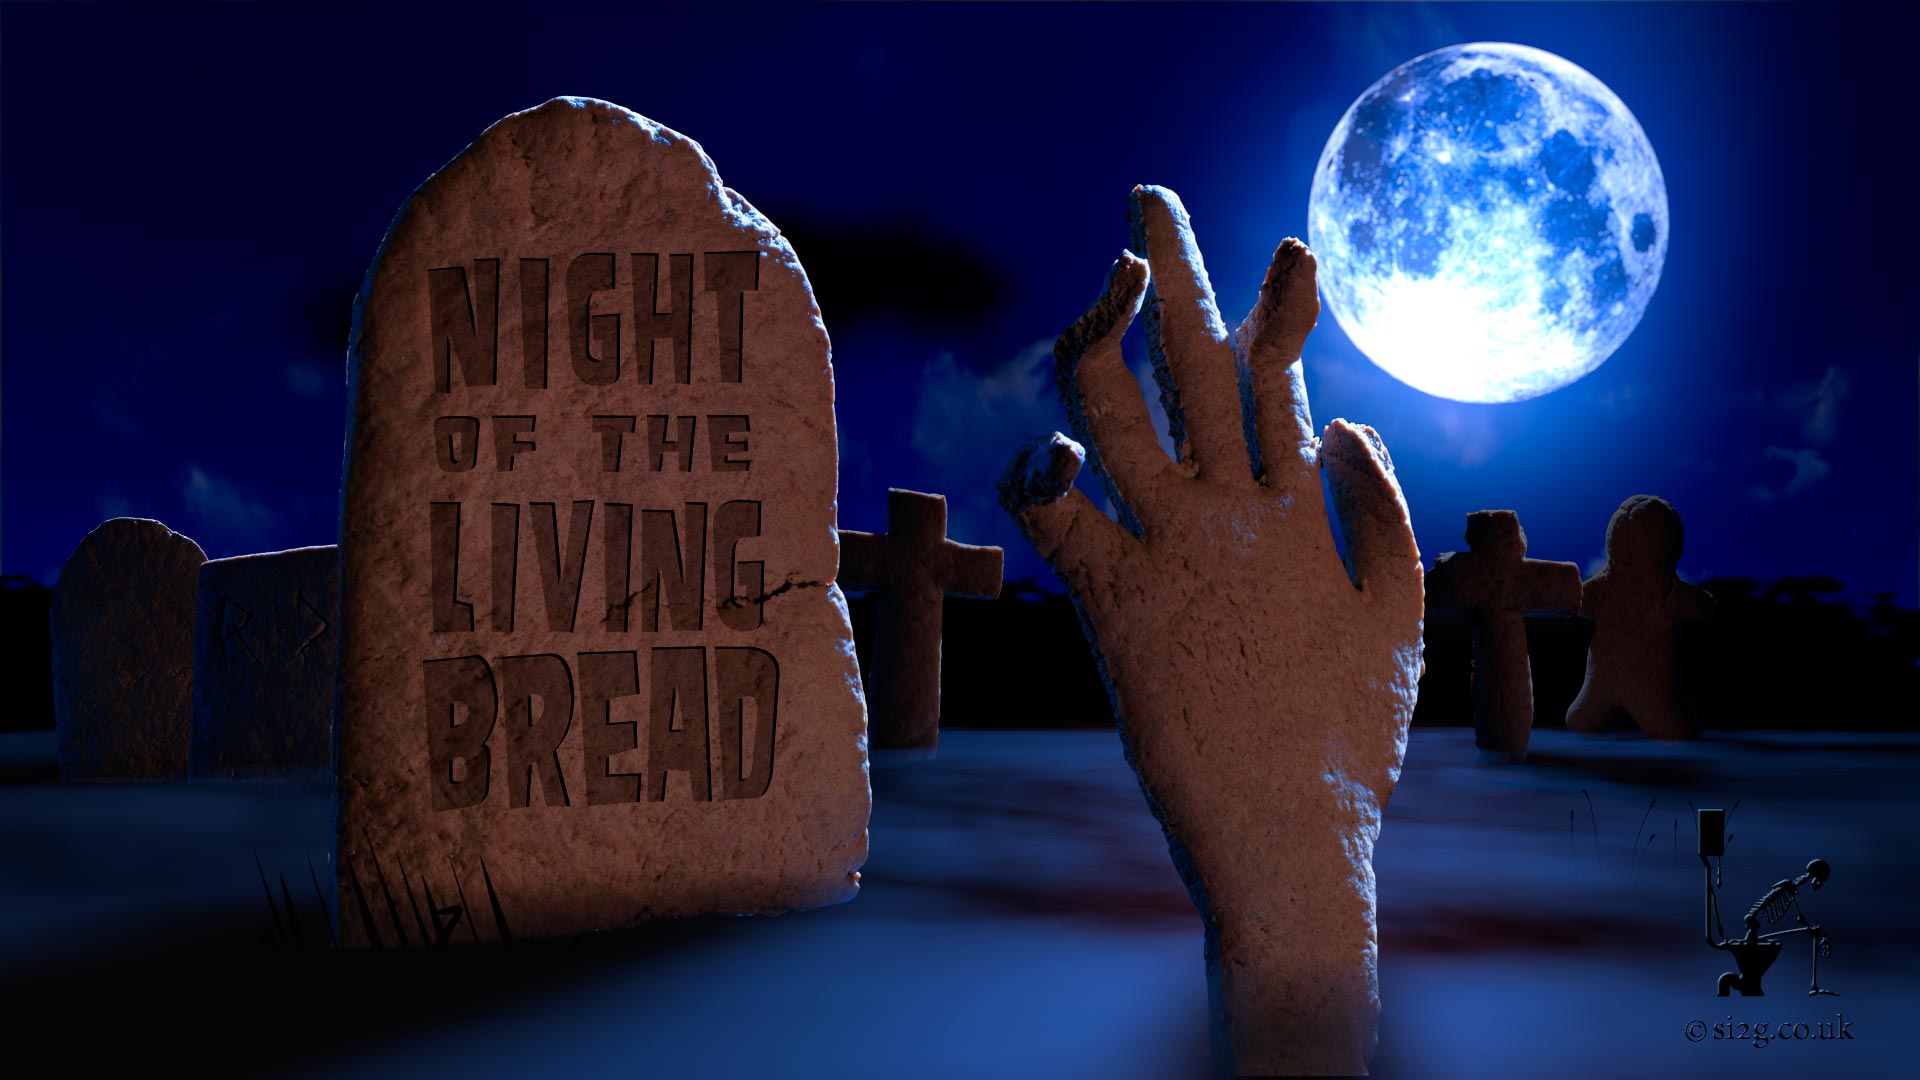 Frame-grab from Night of the Living Bread - This is a frame-grab from a video animation we created.  We wanted the realism you get when photographing gingerbread but be able to animated them with minimal time using a digital system.  Putting the photographs into a computer for the animation stage gave us extra flexibility during the animation stage.  We were able to achieve this animation a lot quicker than if we tried to stop-motion photograph the entire thing in the studio.